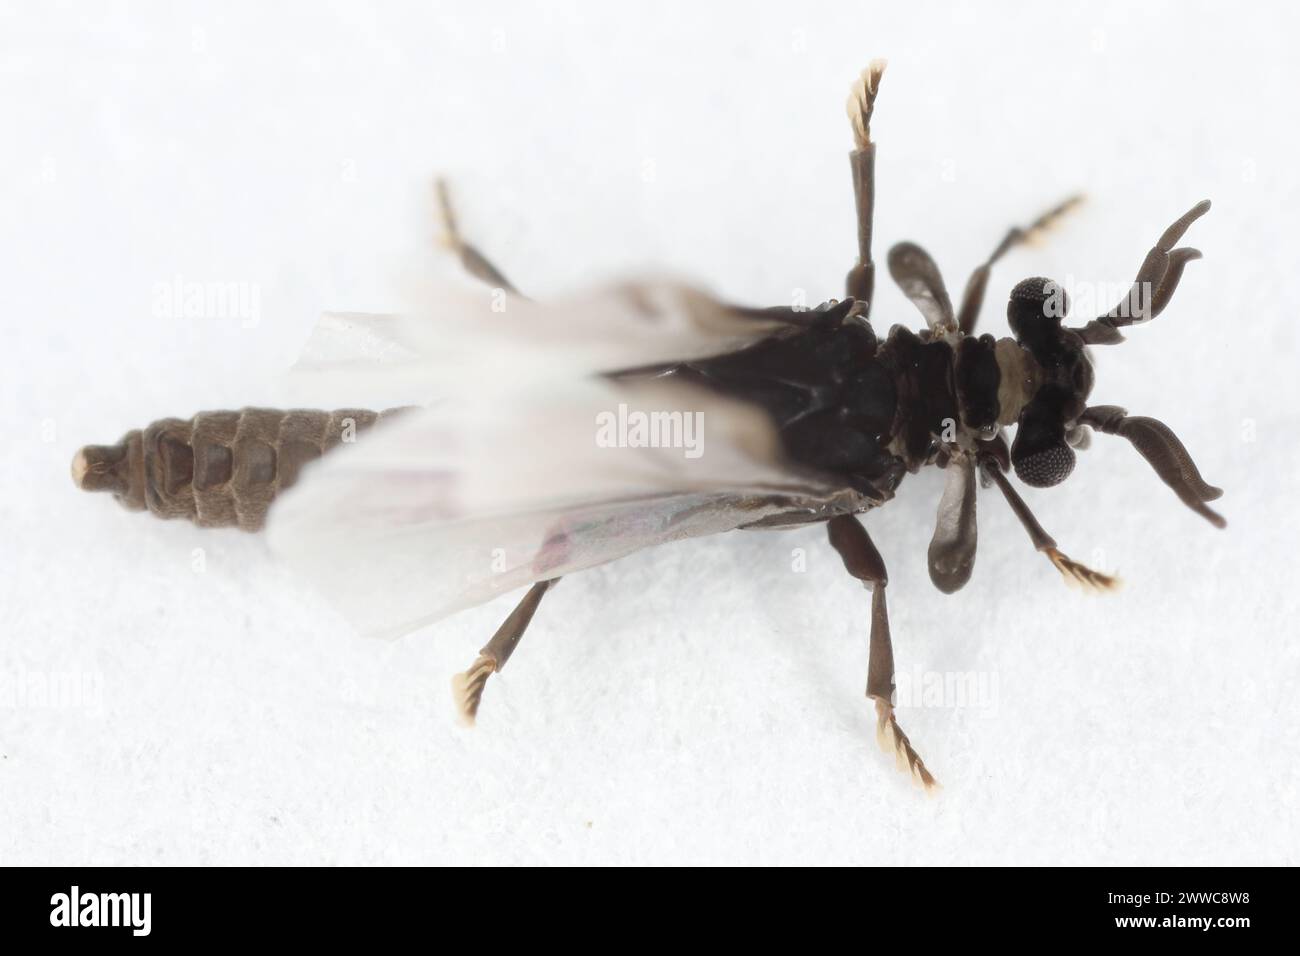 Male of Stylops. Strepsiptera, this is a mysterious order of insects that are parasites of other insects, mainly bees. Stock Photo